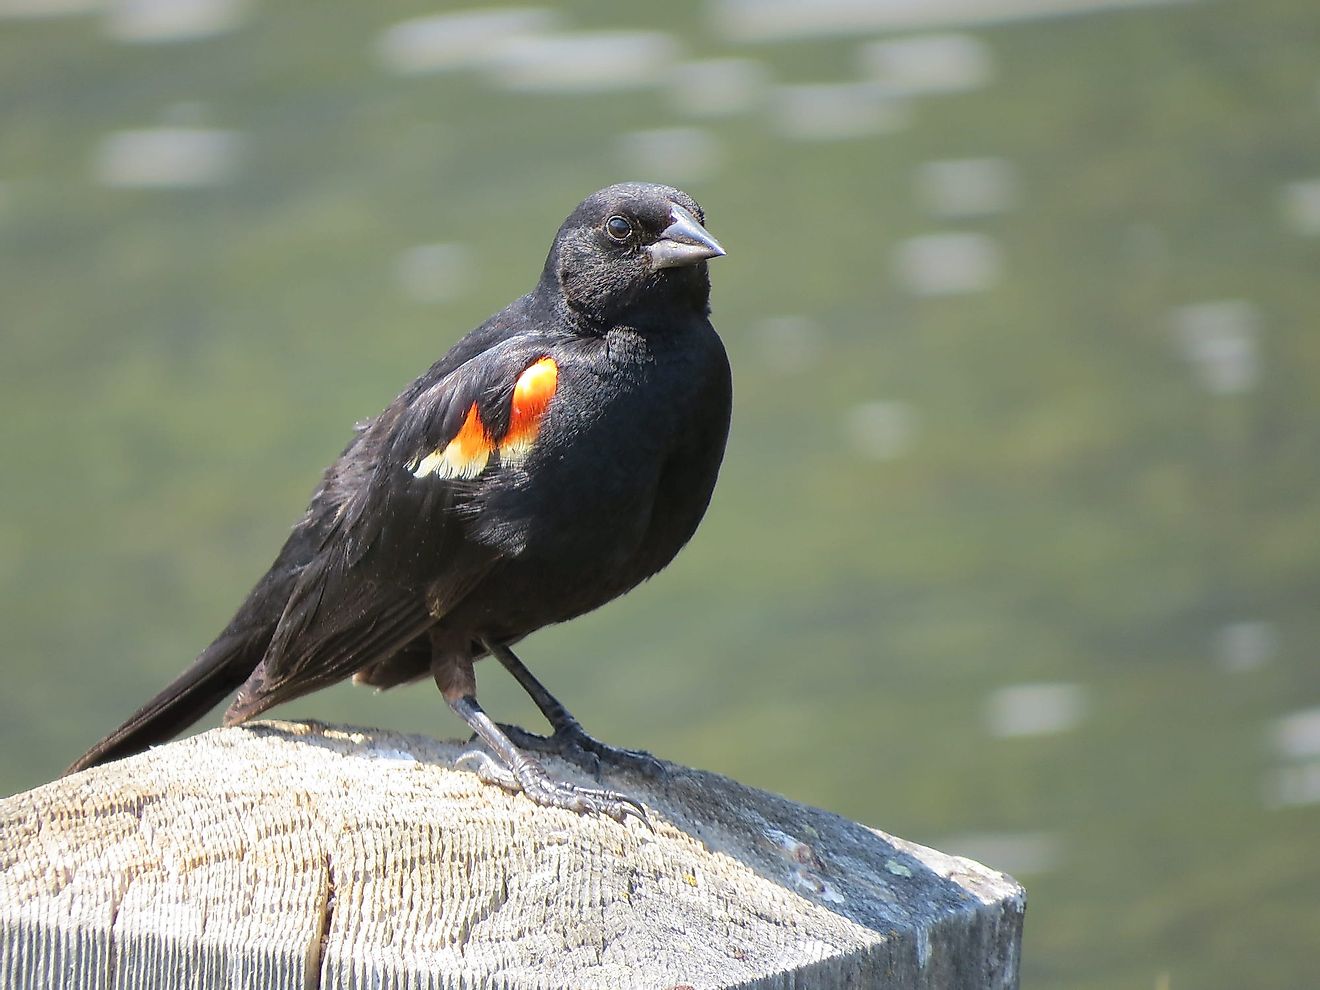 A red-winged blackbird. Image credit: Pxfuel.com